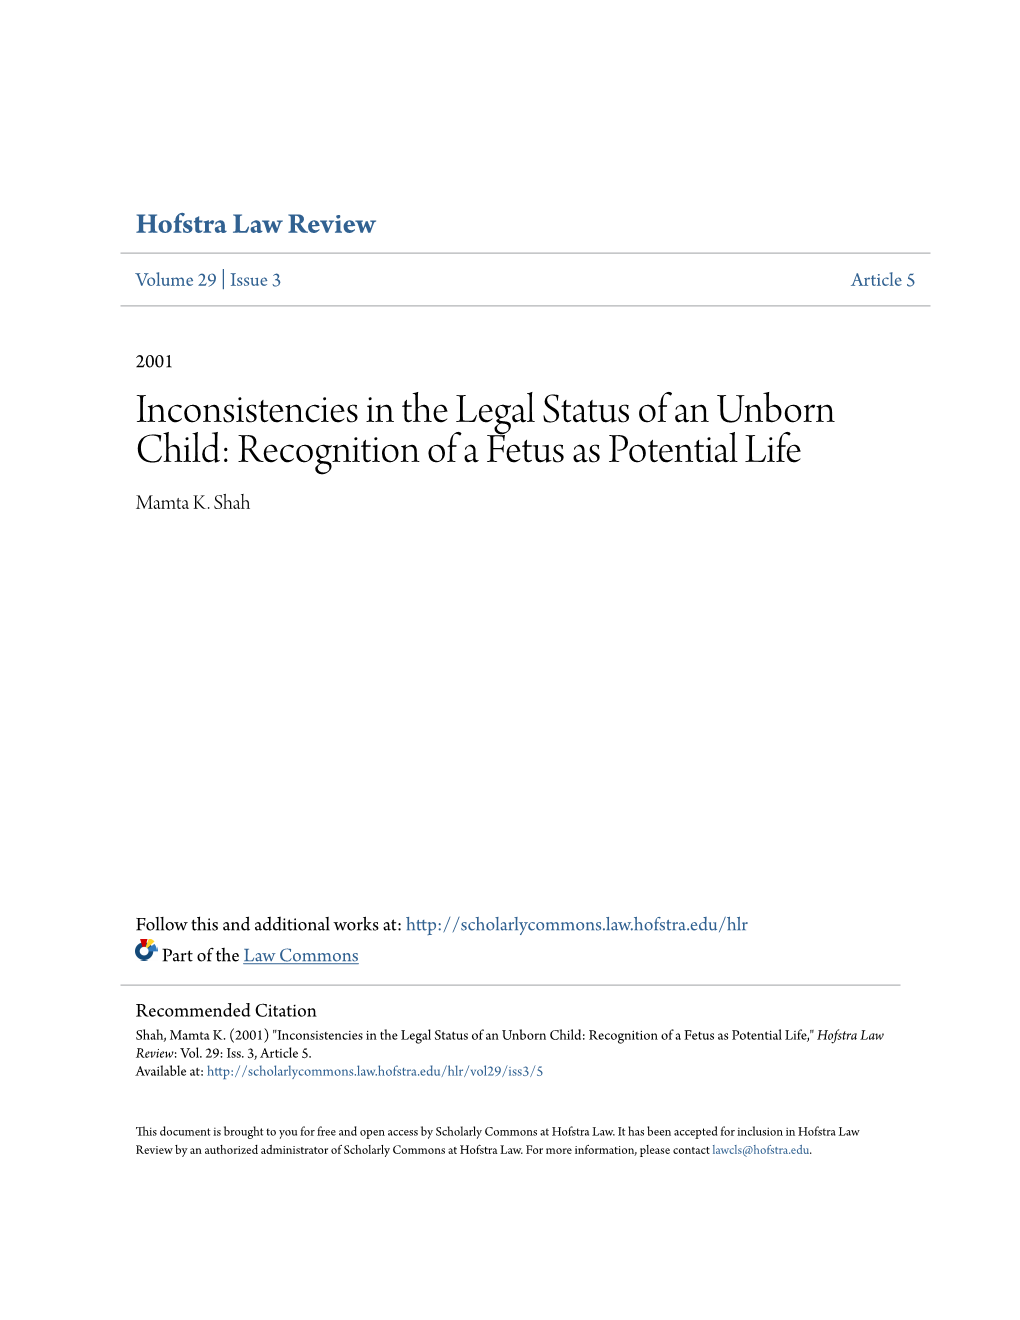 Inconsistencies in the Legal Status of an Unborn Child: Recognition of a Fetus As Potential Life Mamta K